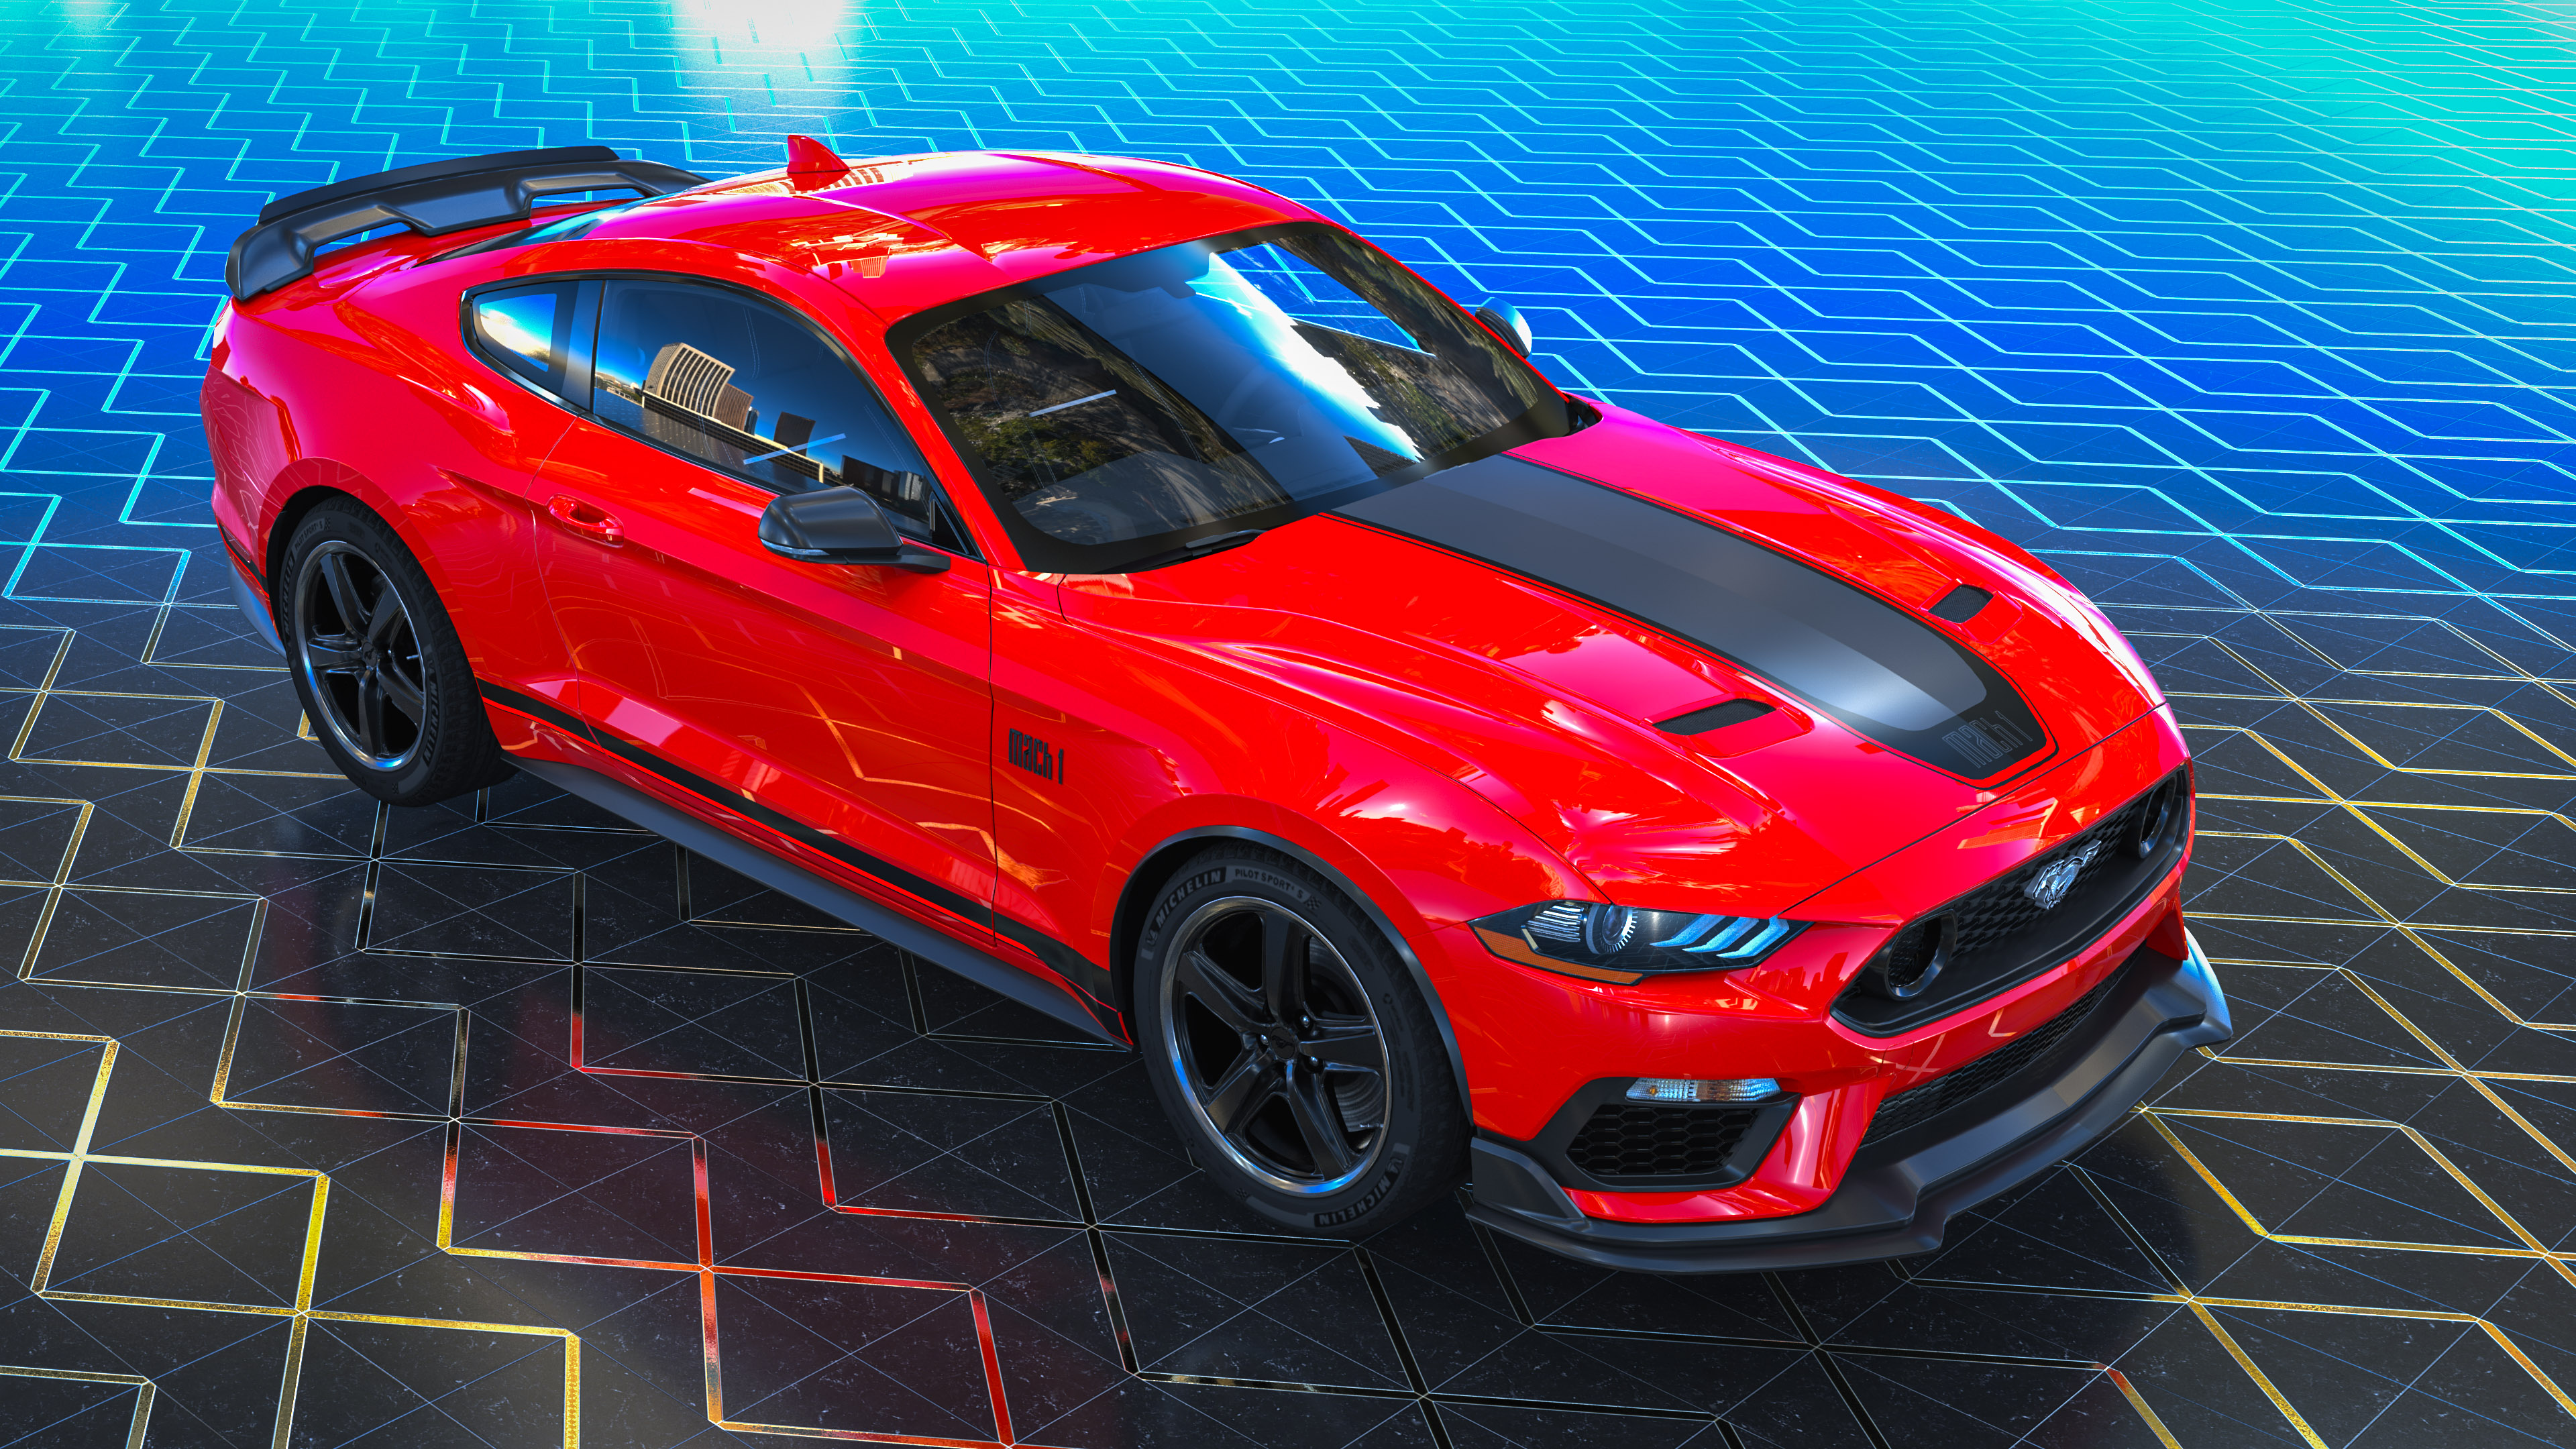 Experience the speed and power of the red Ford Mustang Mach1 through our car ultra HD 4K wallpaper, transforming your PC screens.